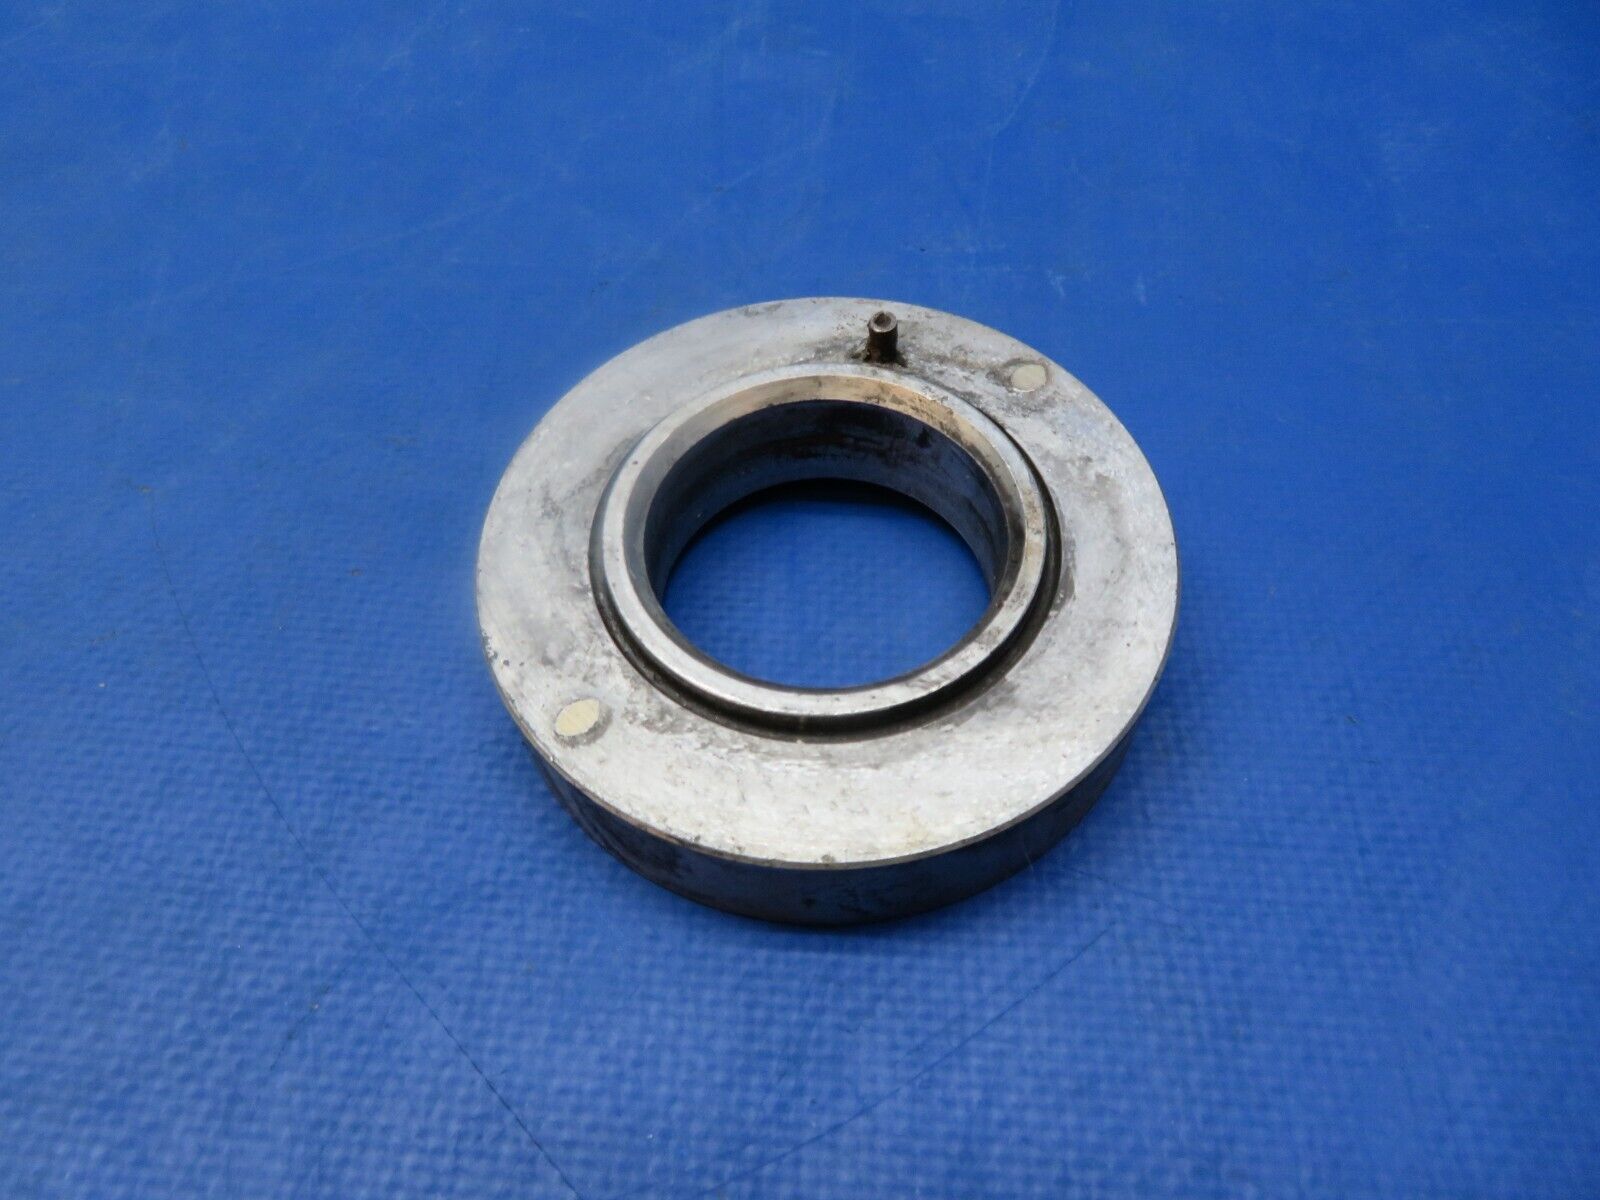 Continental O-470 Engine Mount Spacer P/N 0851551-1 (1223-150)